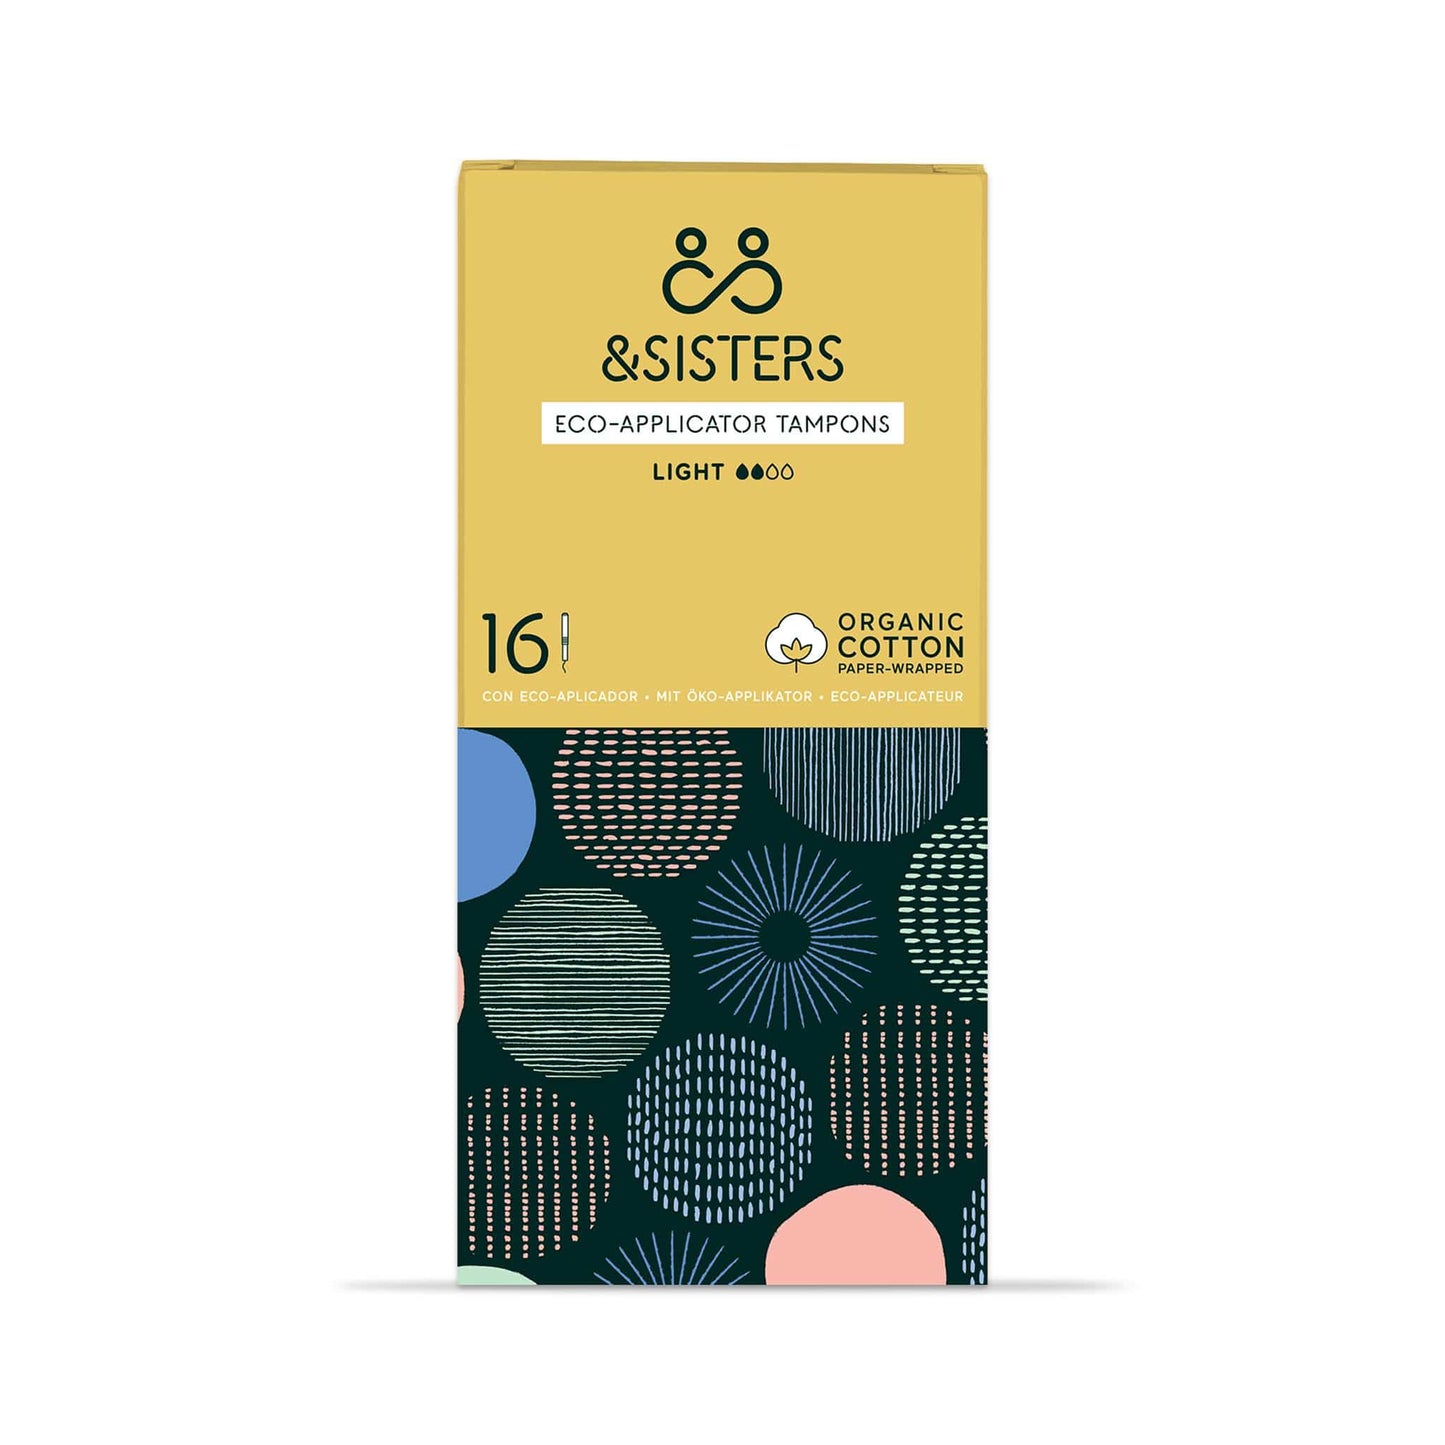 & SISTERS Tampons Light Eco-applicator Tampons - Plastic-Free and Organic Cotton - & SISTERS